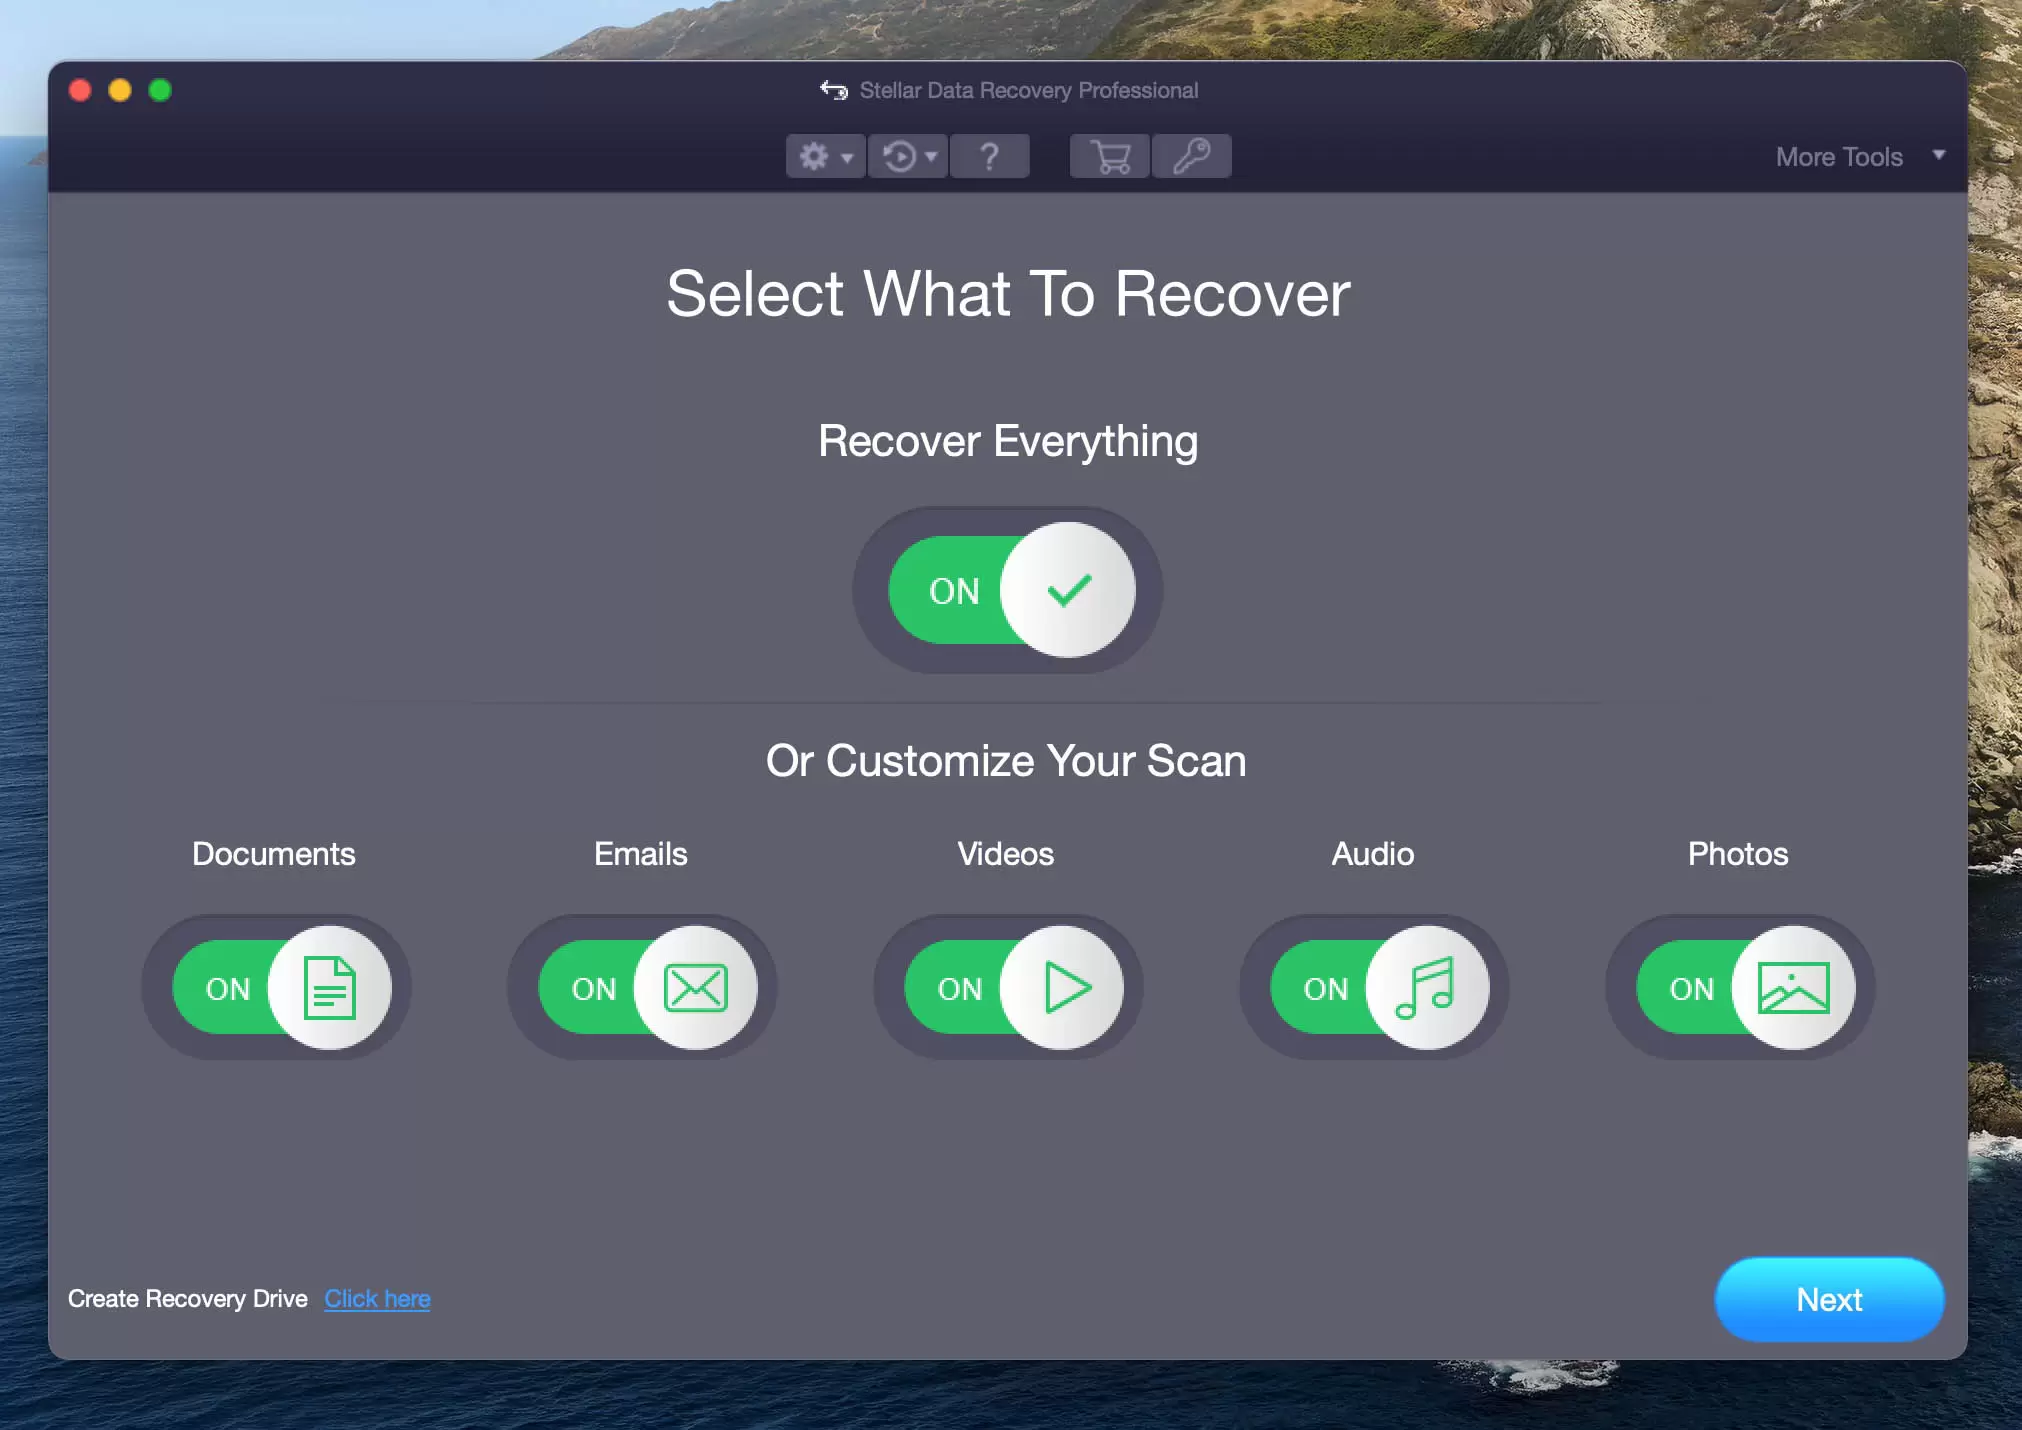 stellar-data-recovery-professional-home-screen-1